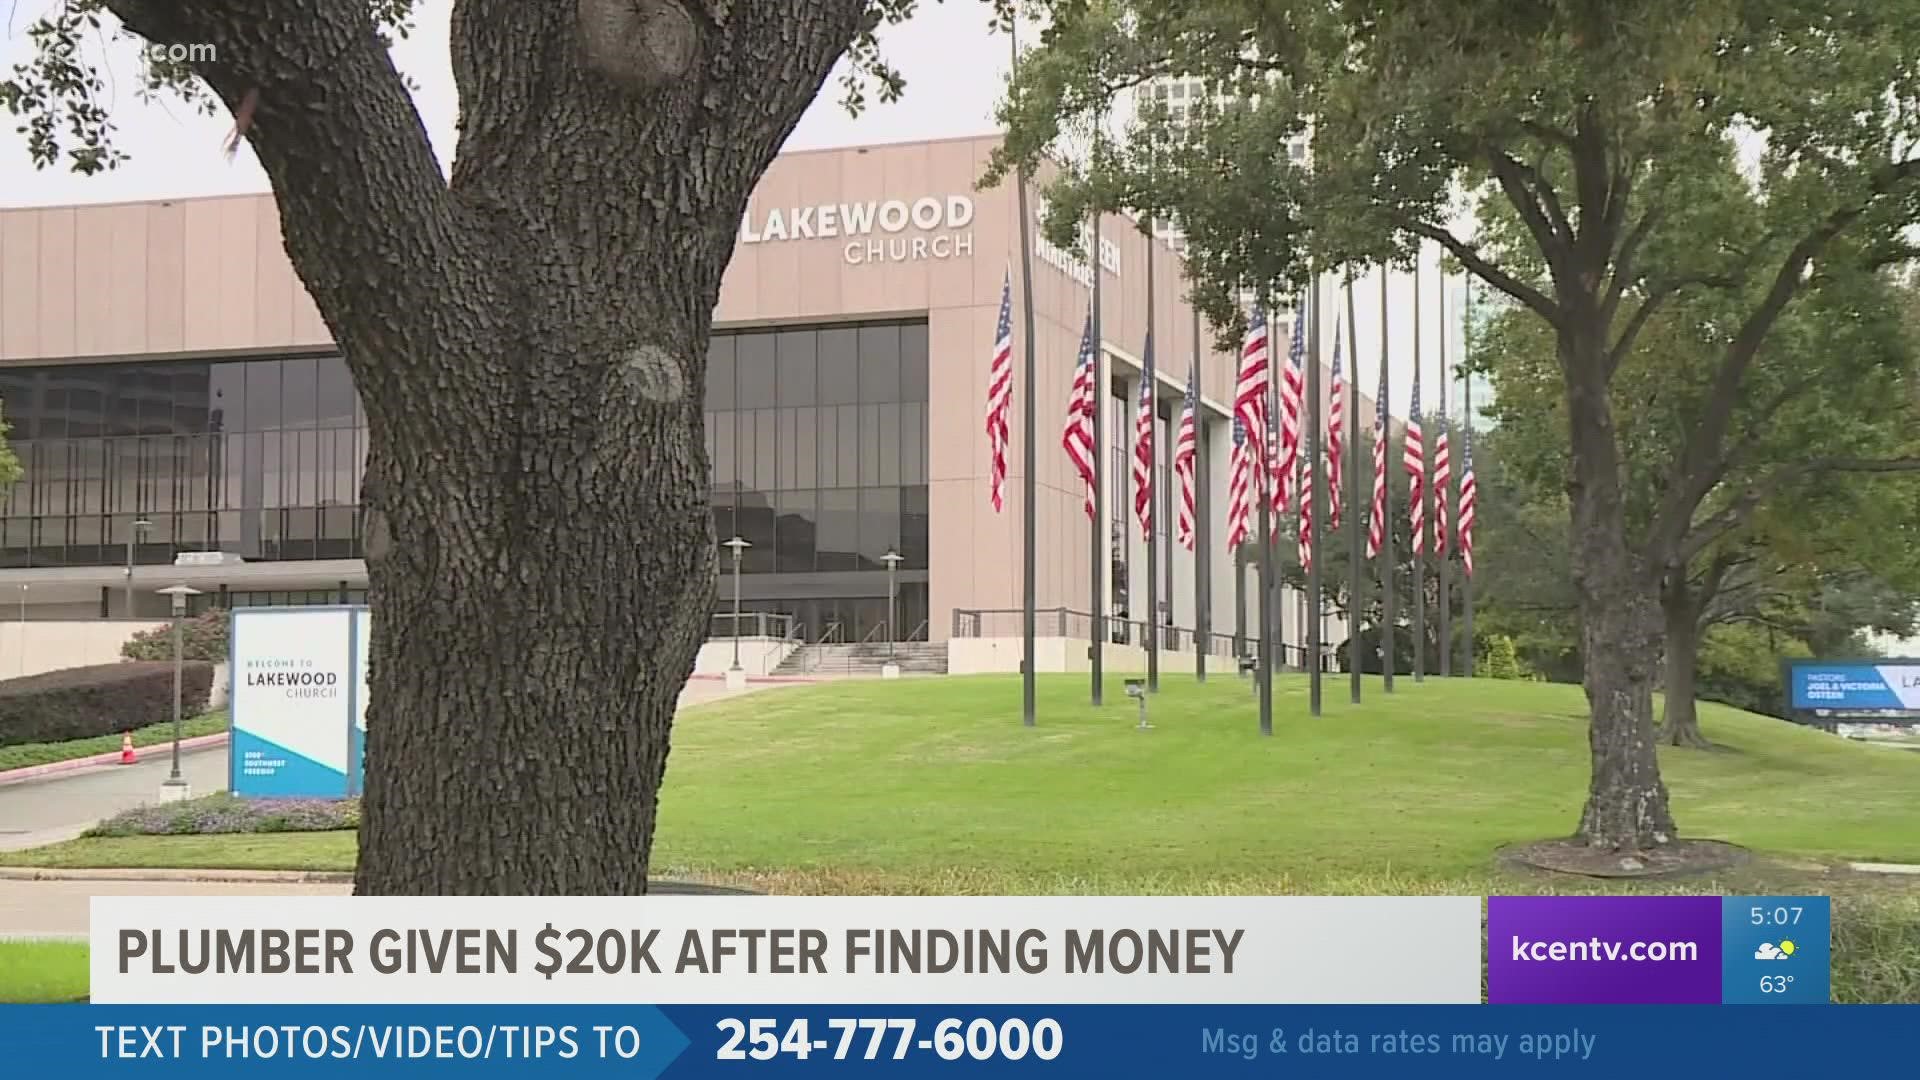 Houston plumber wants to thank The Olstens after receiving $20k after finding a large sum of money in Houston's Lakewood Church.